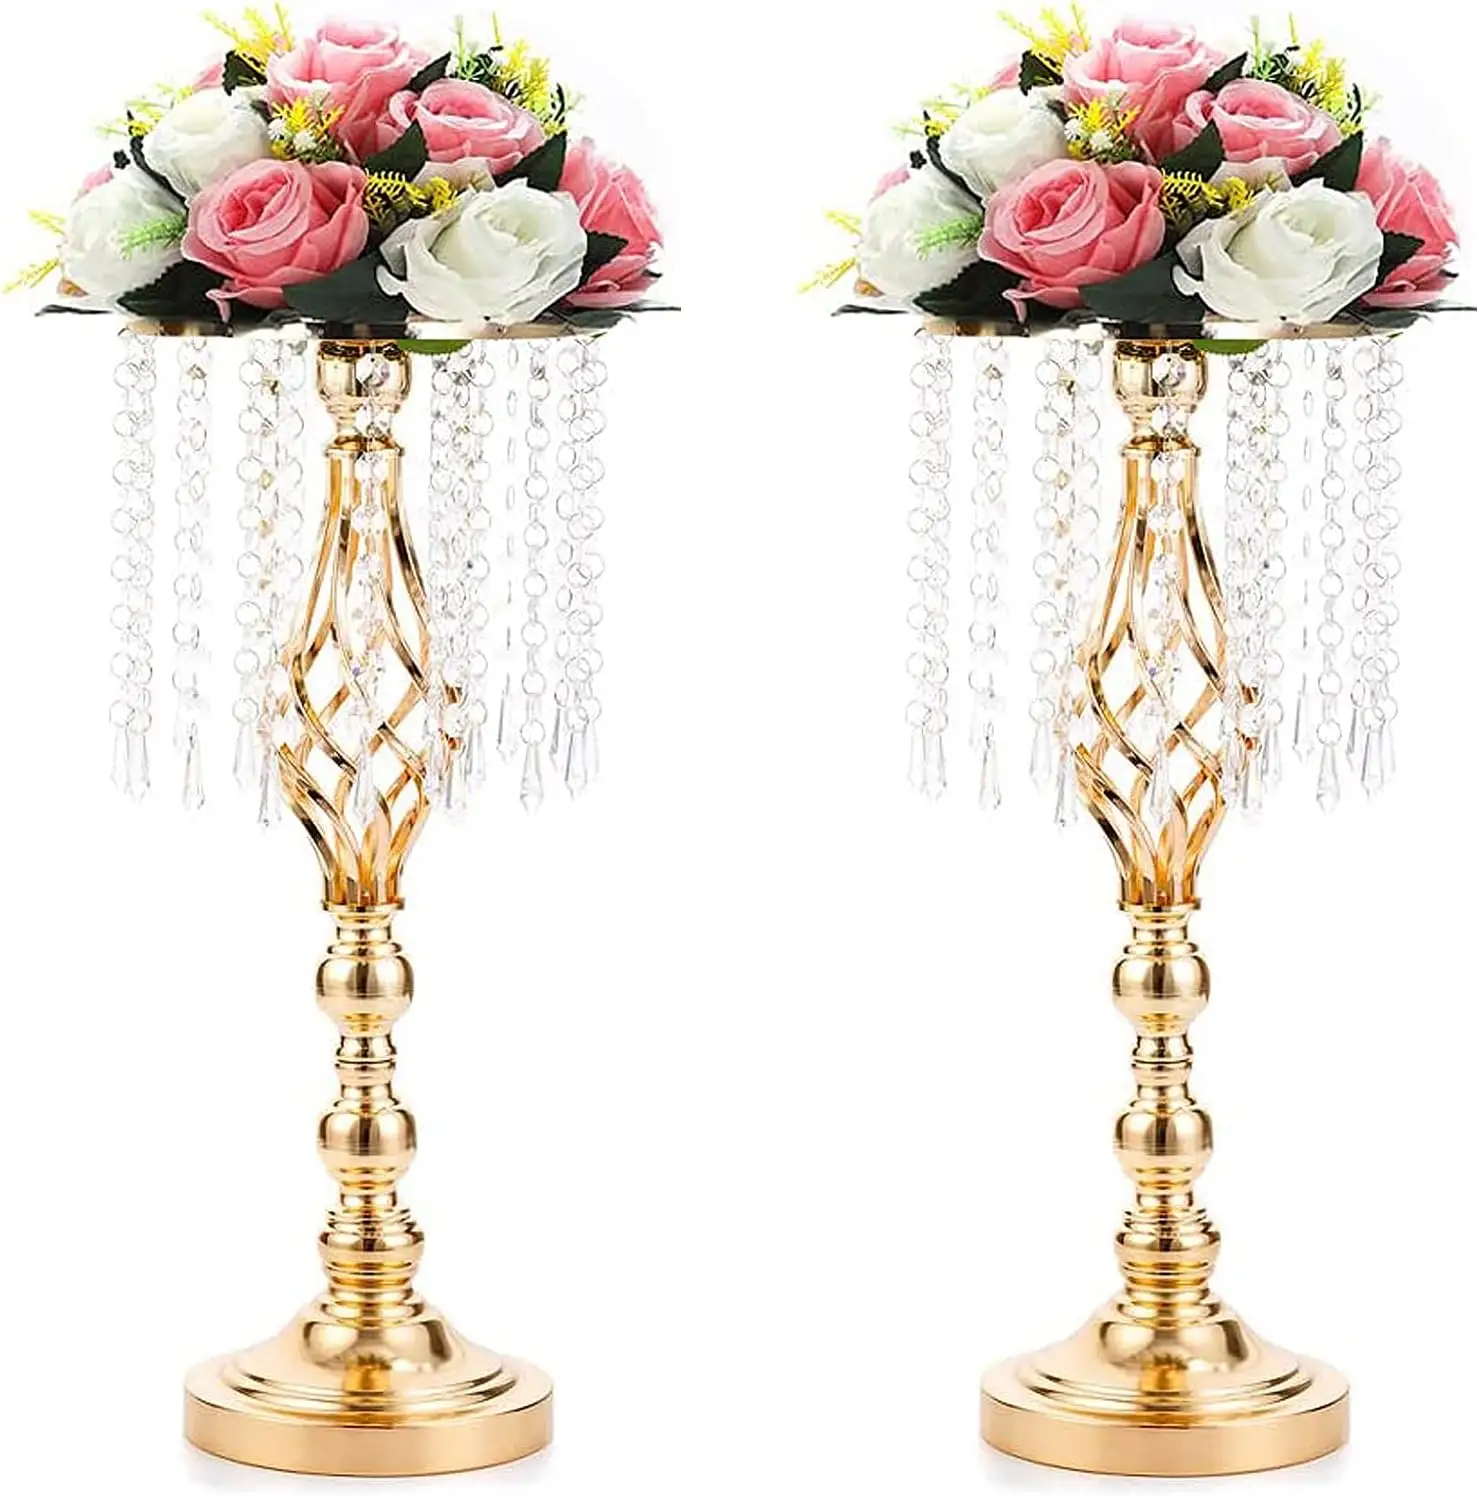 Iron Vases Metal Tall Artificial Flower Stand Gold Candelabra Crystal Centerpieces for Wedding Table Decoration